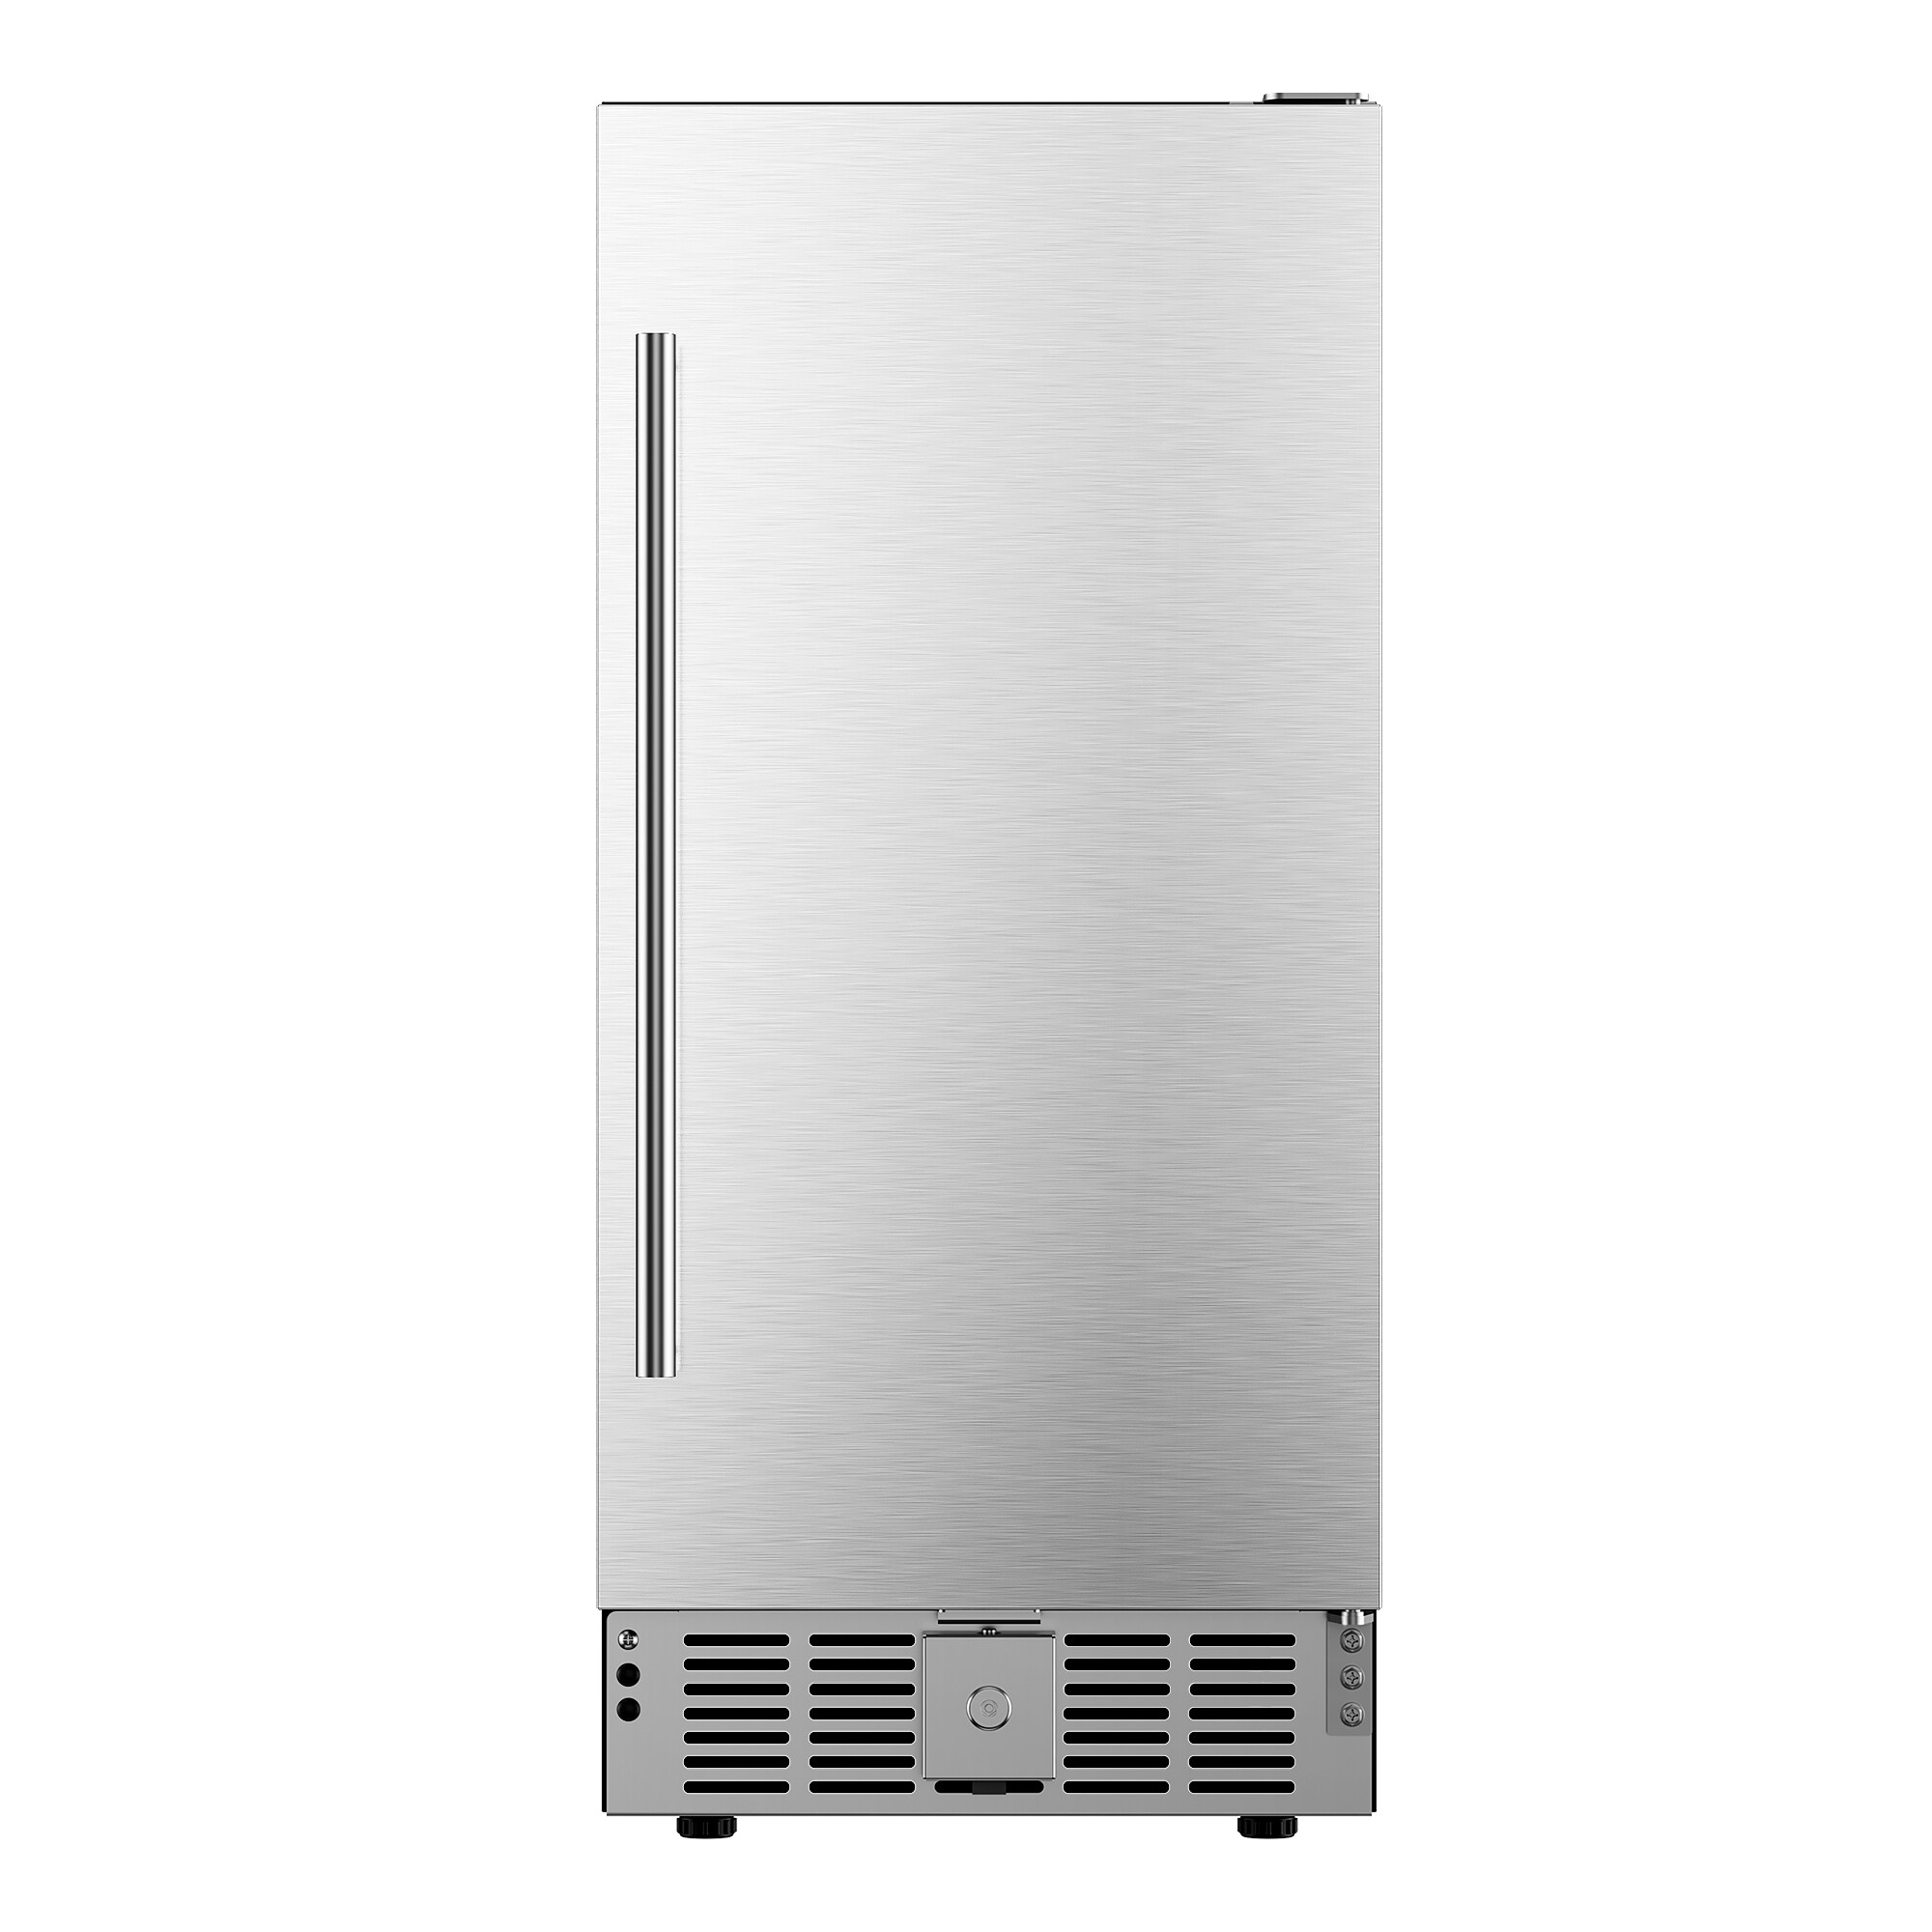 SIMZLIFE 15-in W 127-Can Capacity Sliver Built-In/Freestanding 